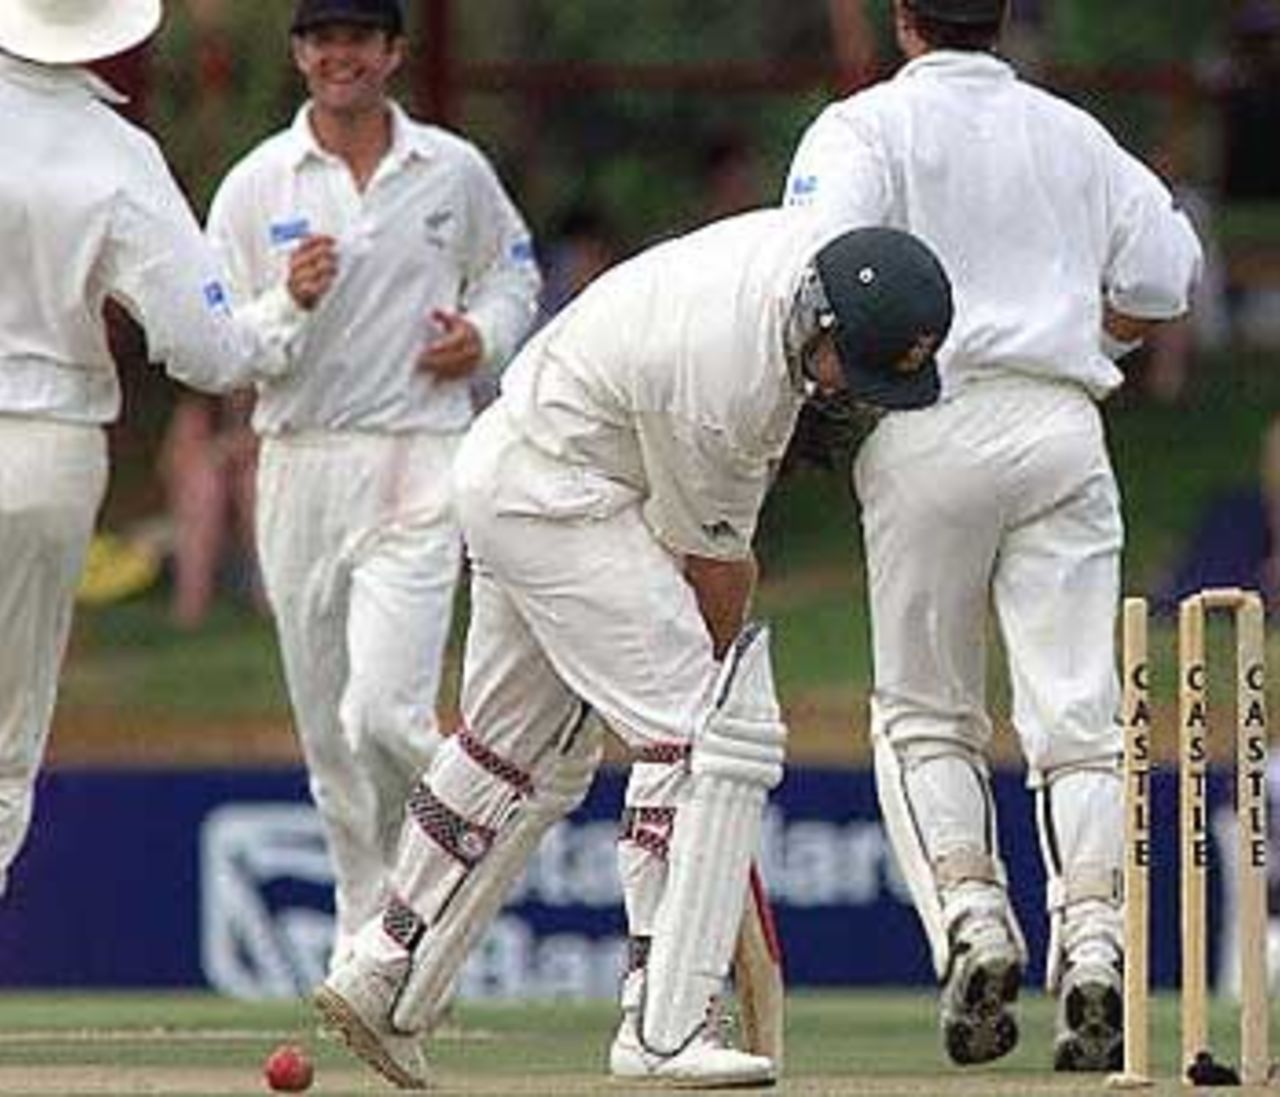 Daryll Cullinan being bowled by Brooke Walker, New Zealand in South Africa, 2000/01, 1st Test, South Africa v New Zealand, Goodyear Park, Bloemfontein, 17-21 November 2000 (Day 1).